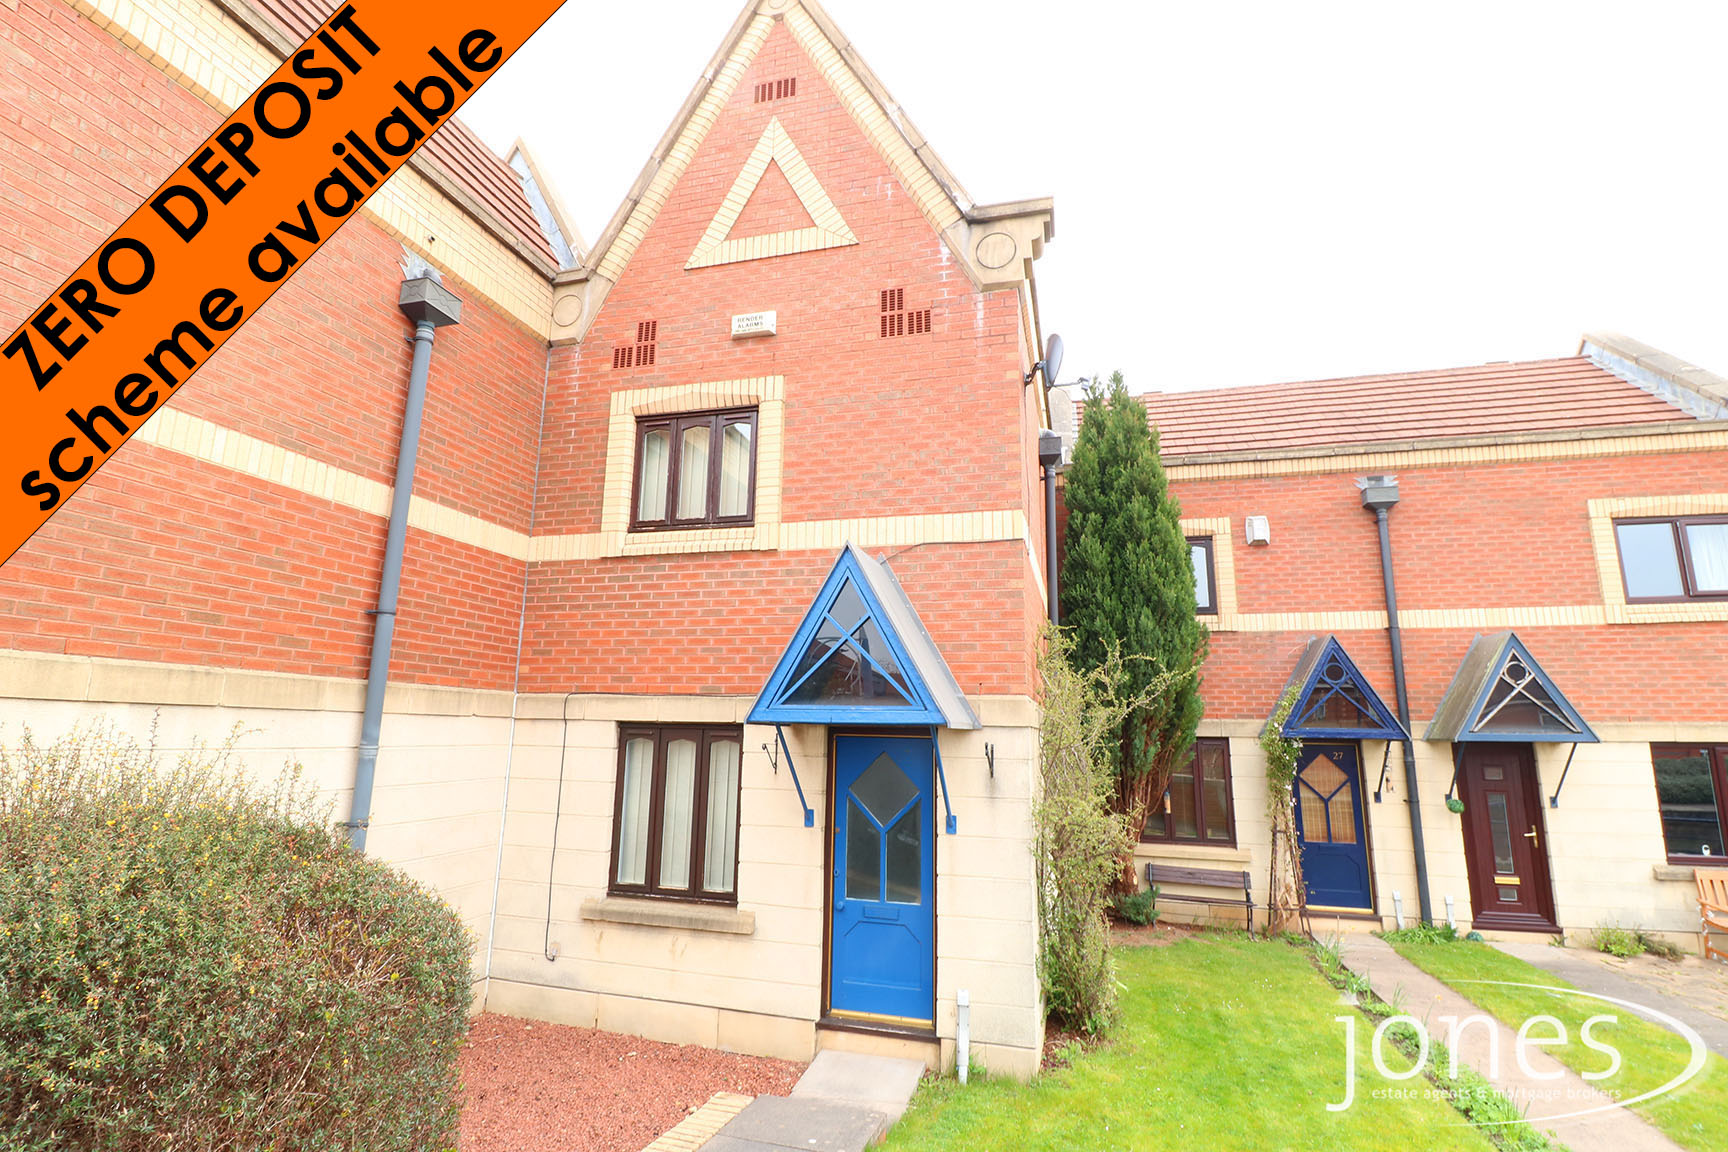 Home for Sale Let - Photo 01 Anchorage Mews,  Thornaby, Stockton on Tees, TS17 6BG